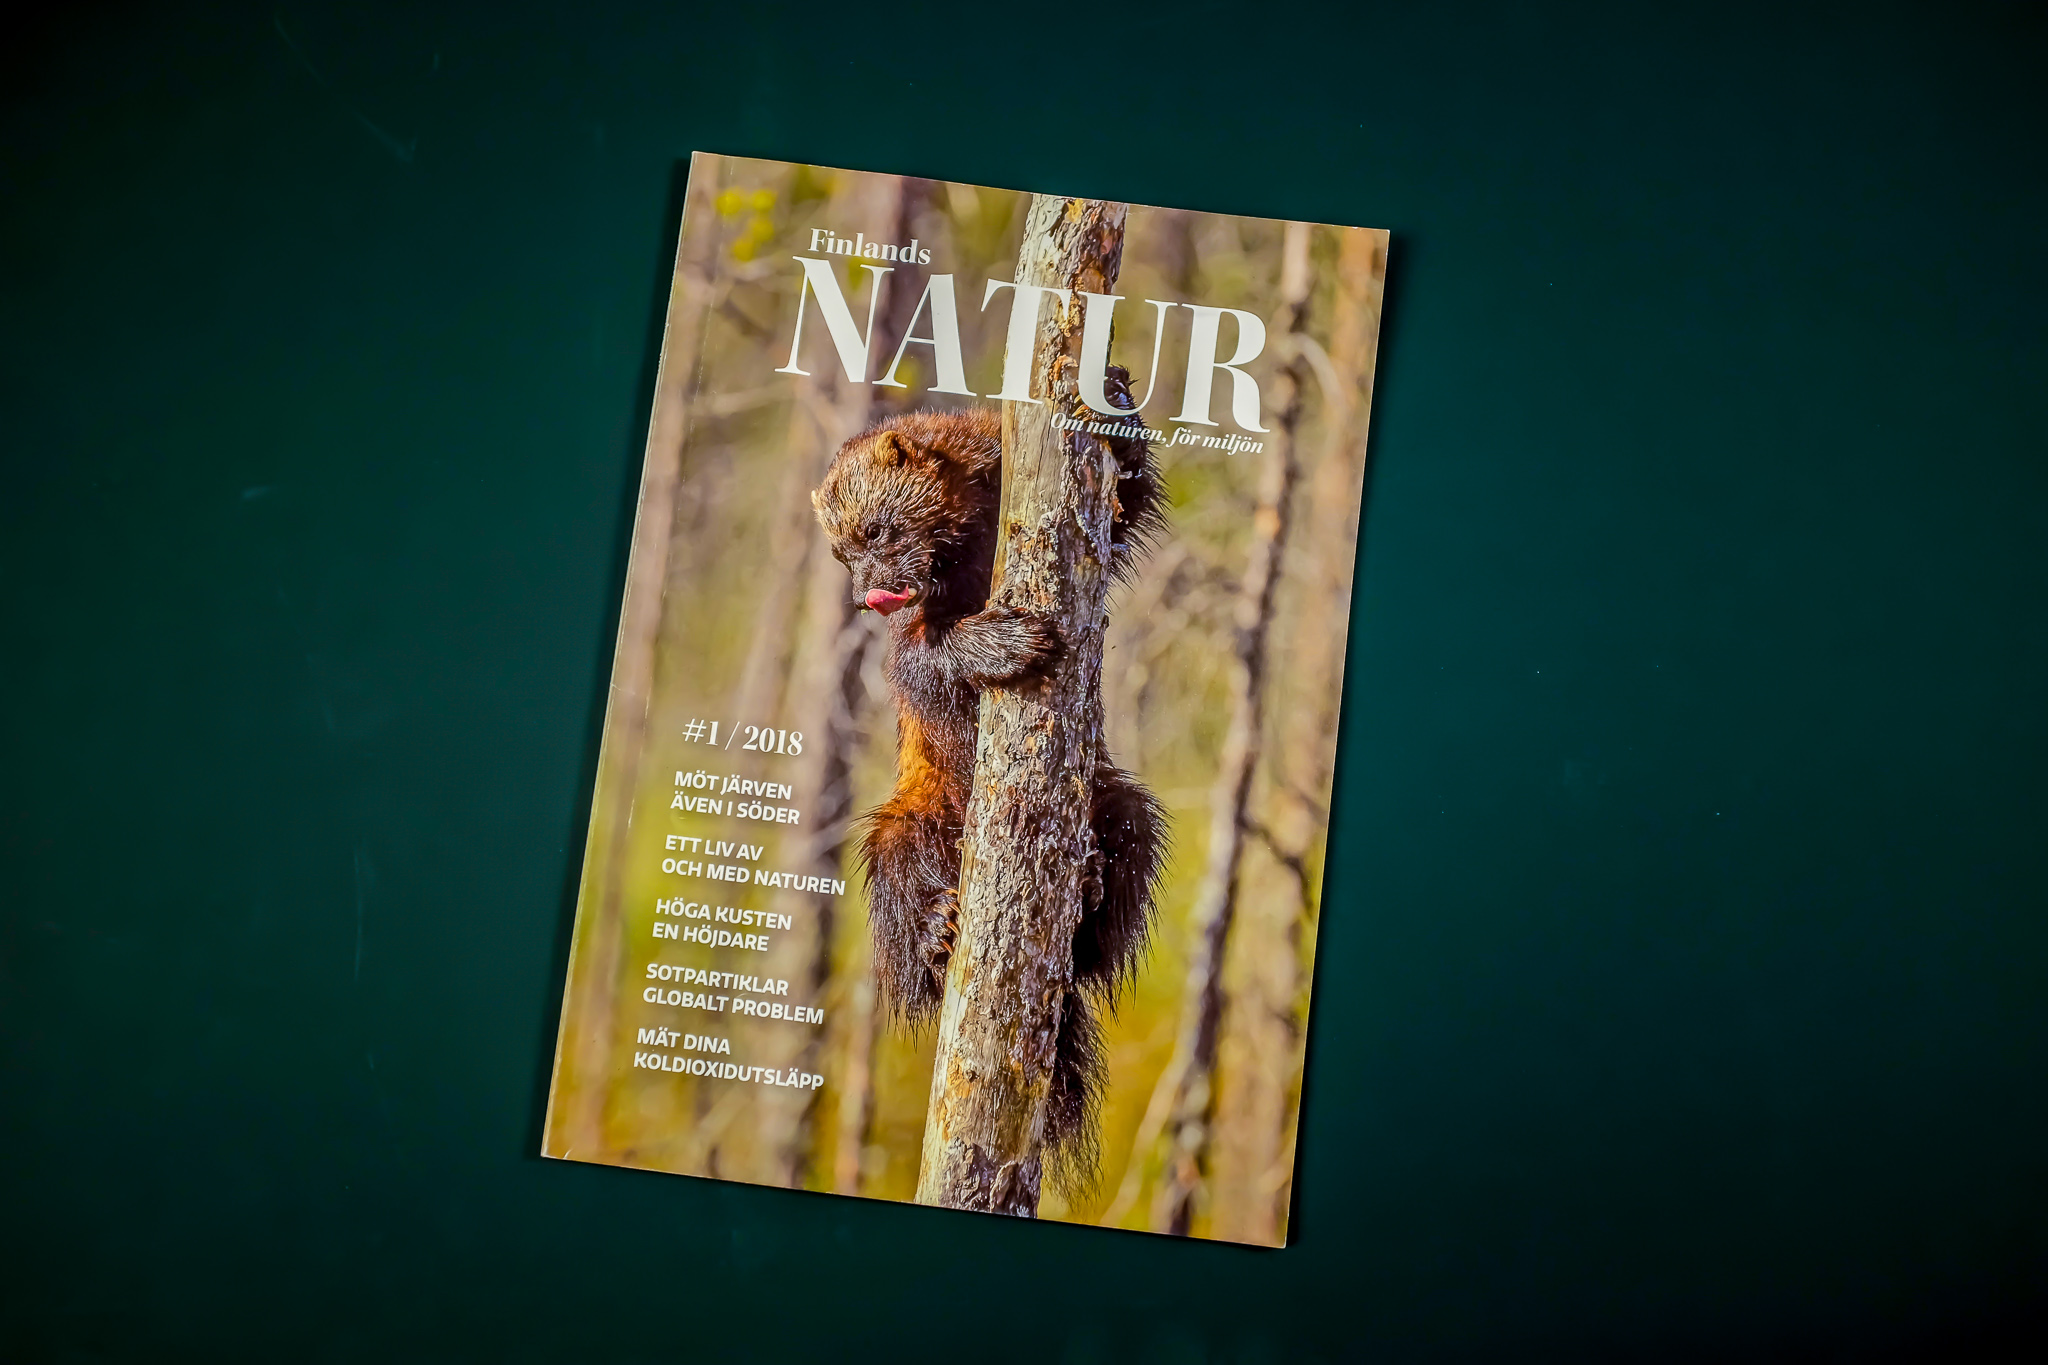 Finlands Natur is a quarterly magazine published by the NGO Natur & Miljö. It's a blend of nature reportage and sustainable living interviews, redesigned to reflect this and appeal to an urban audience in spring 2018.